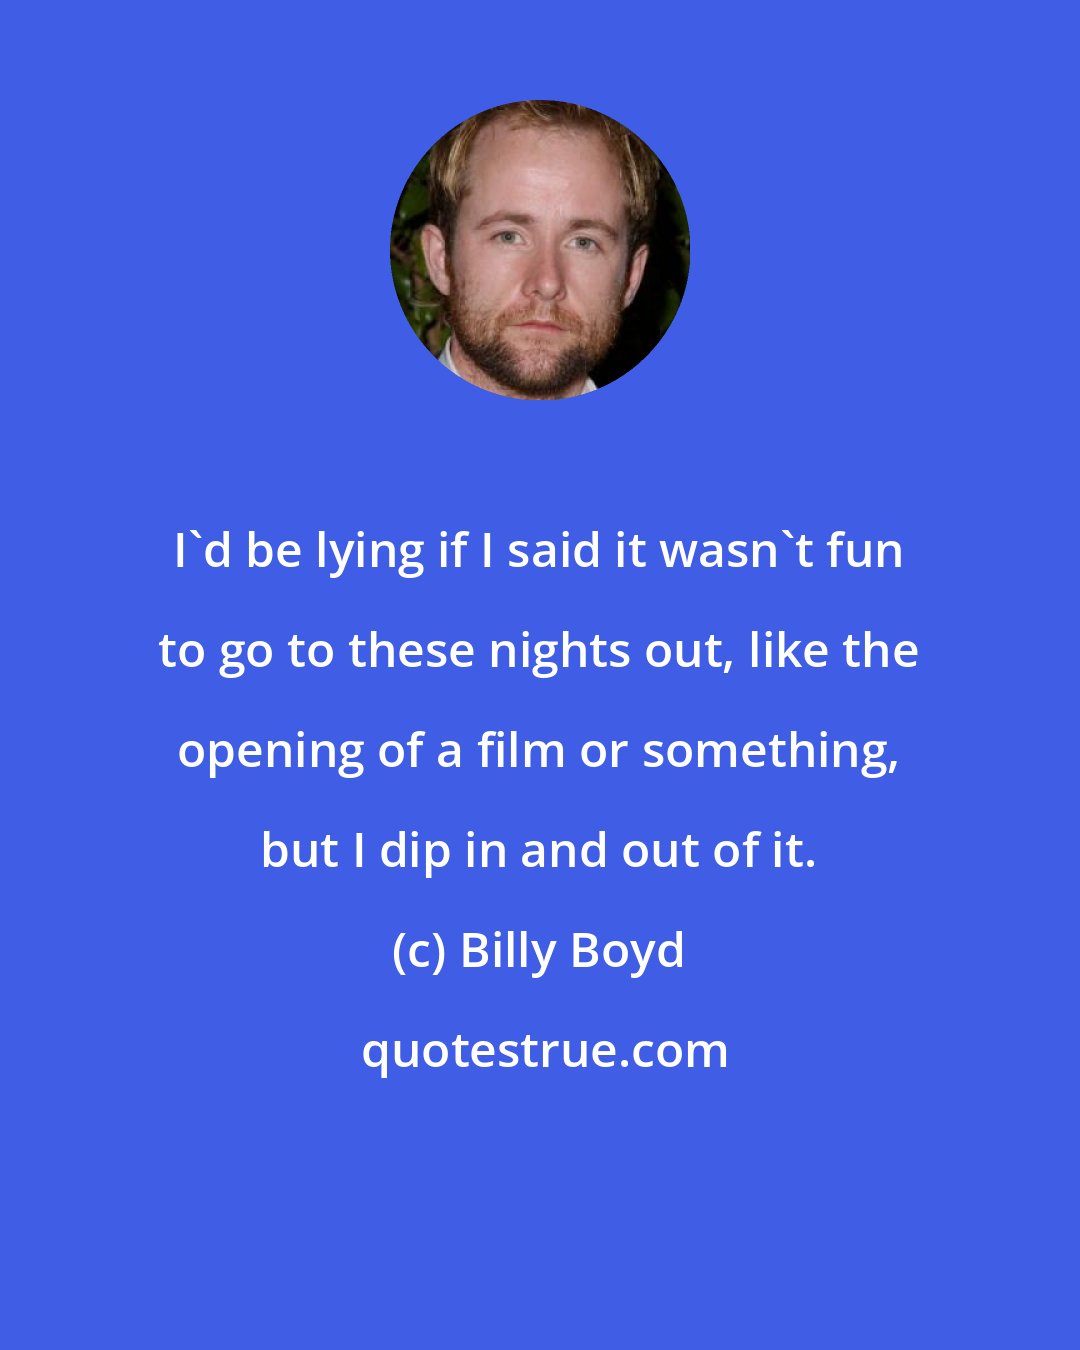 Billy Boyd: I'd be lying if I said it wasn't fun to go to these nights out, like the opening of a film or something, but I dip in and out of it.